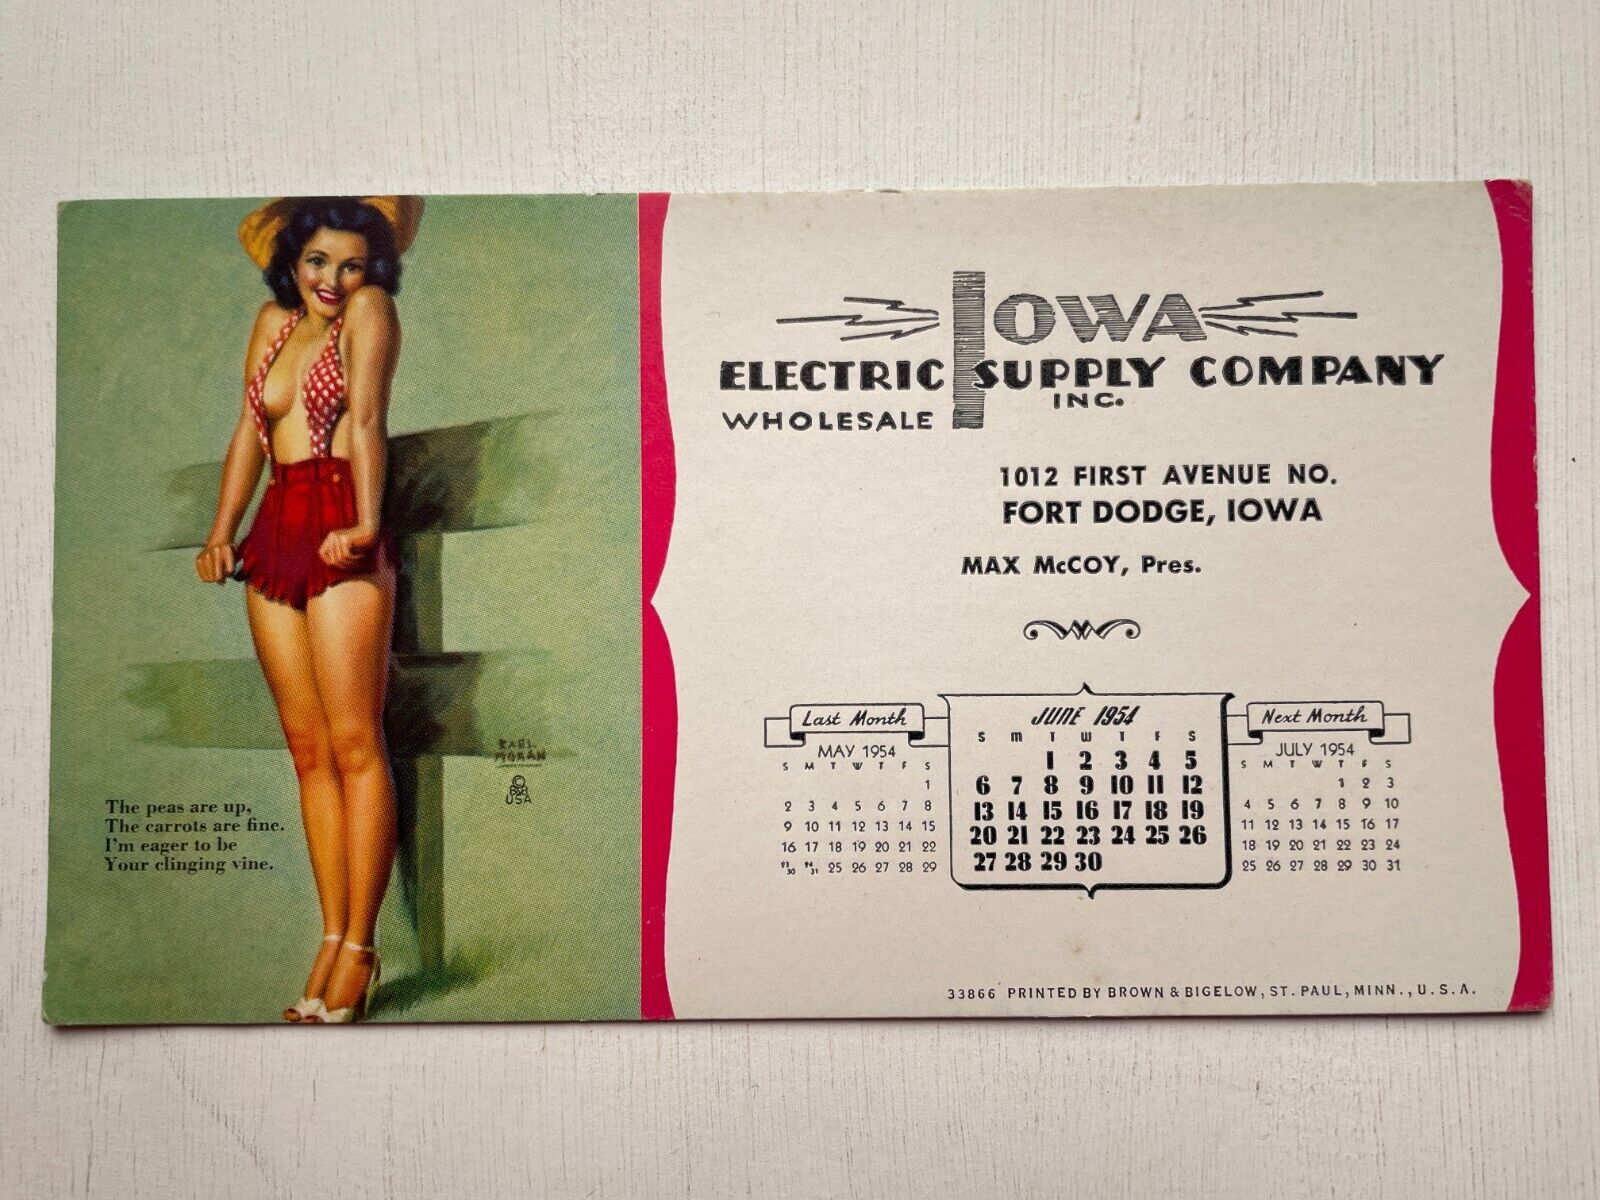 June 1954  Pinup Girl Picture Blotter by Earl Moran- Fort Dodge, Iowa